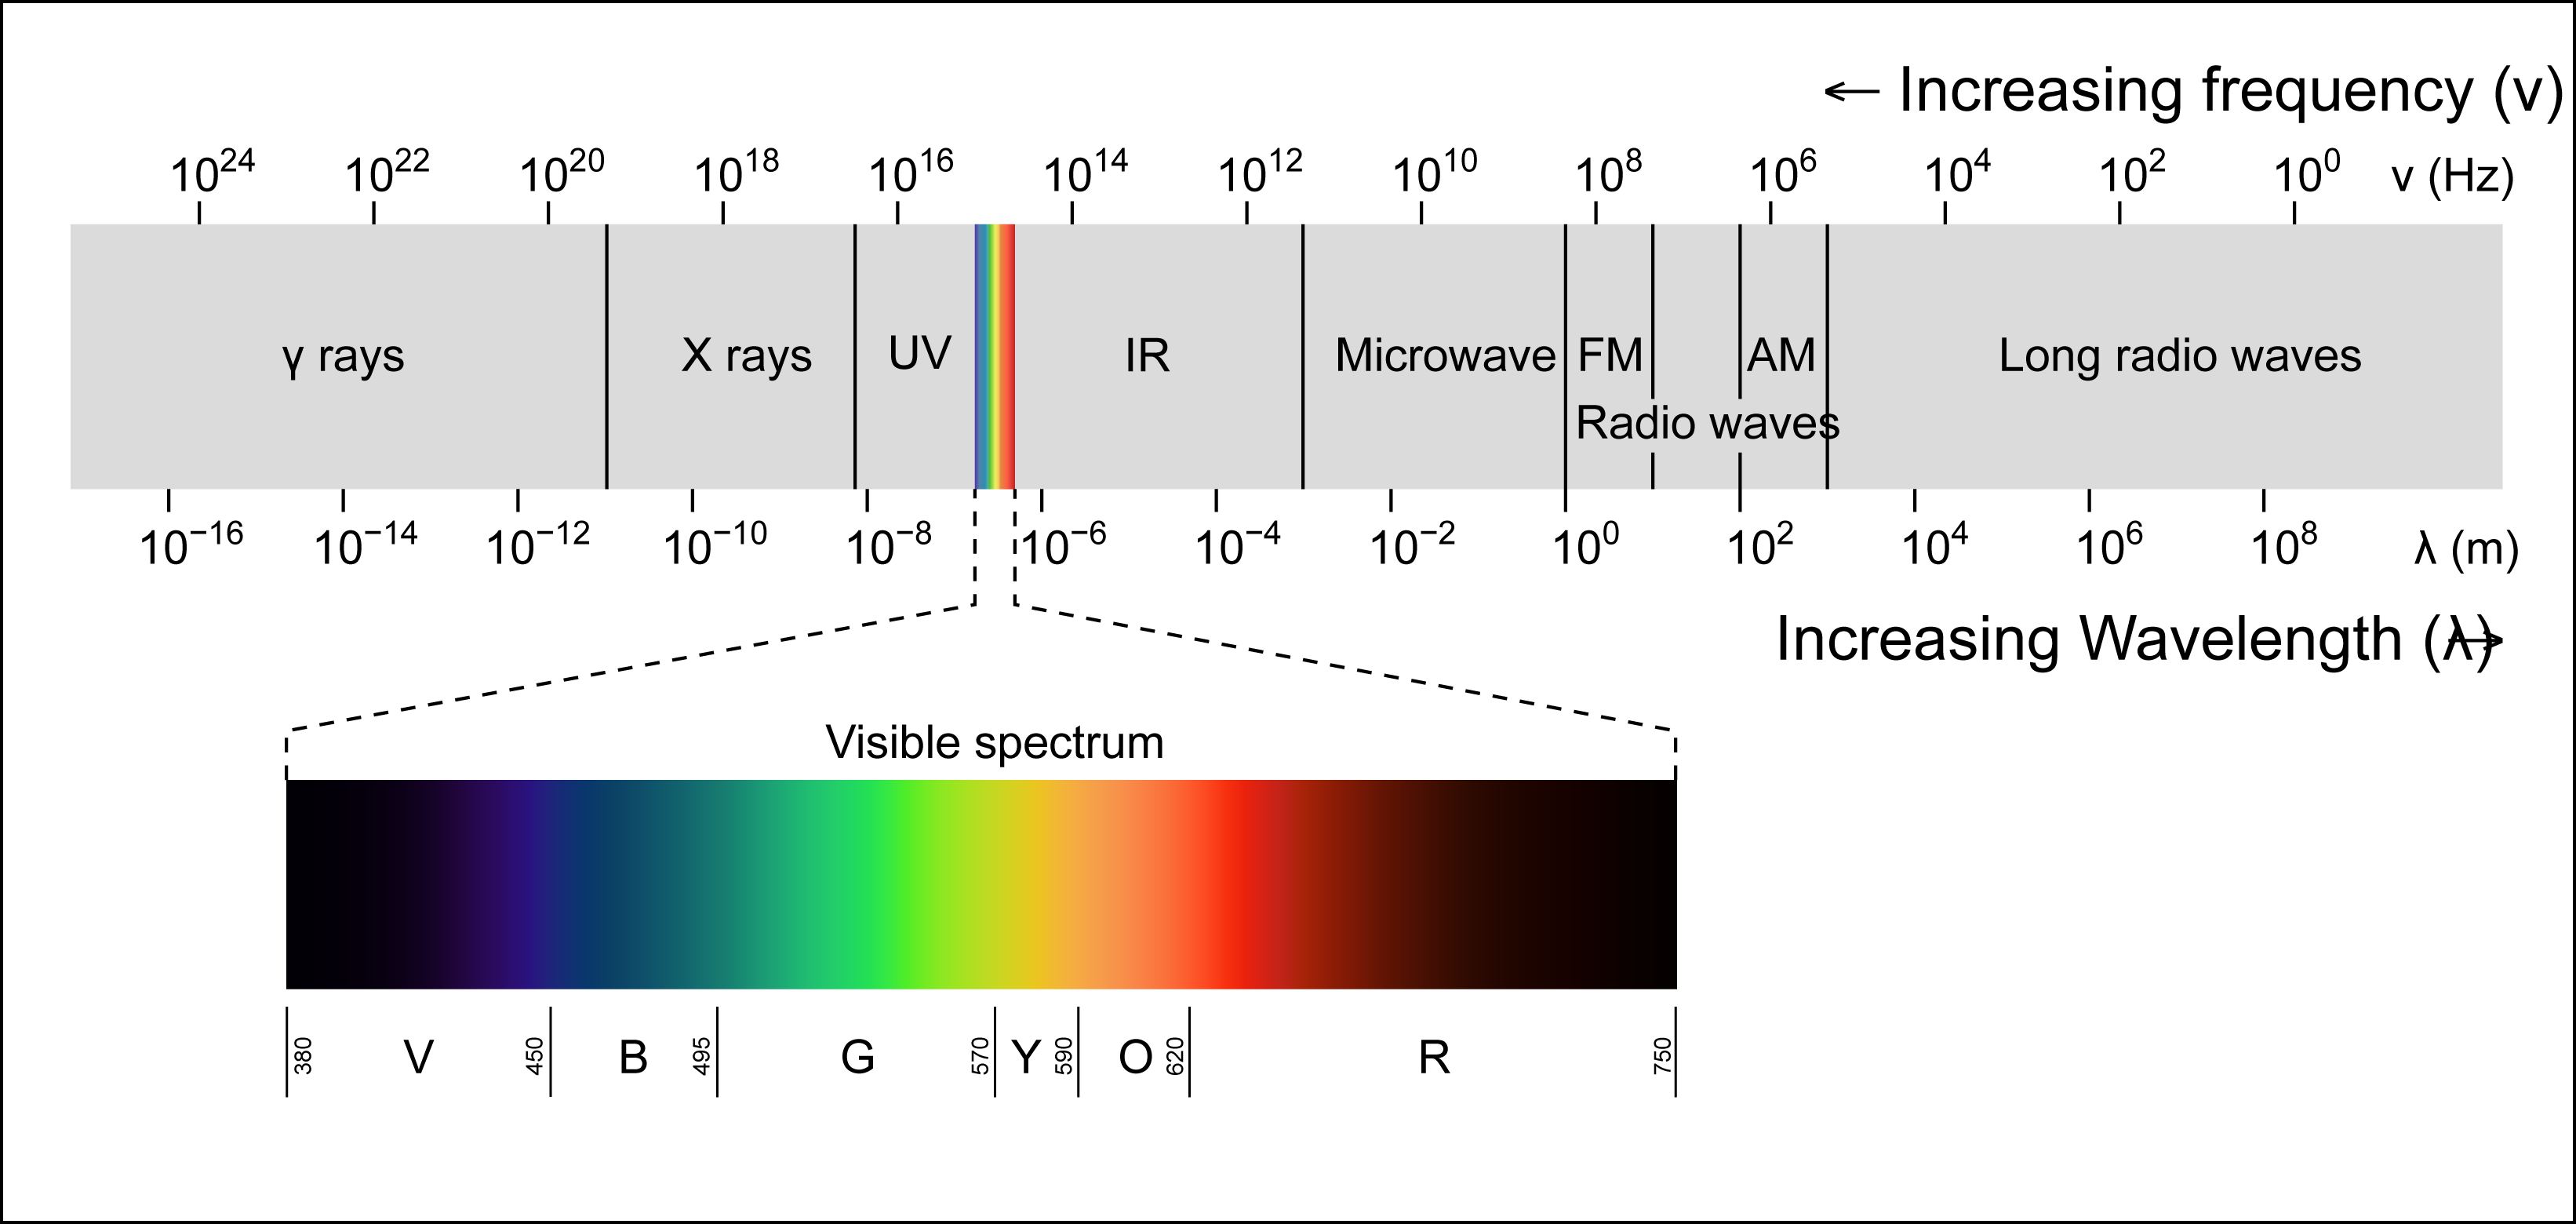 The electromagnetic spectrum with visual light